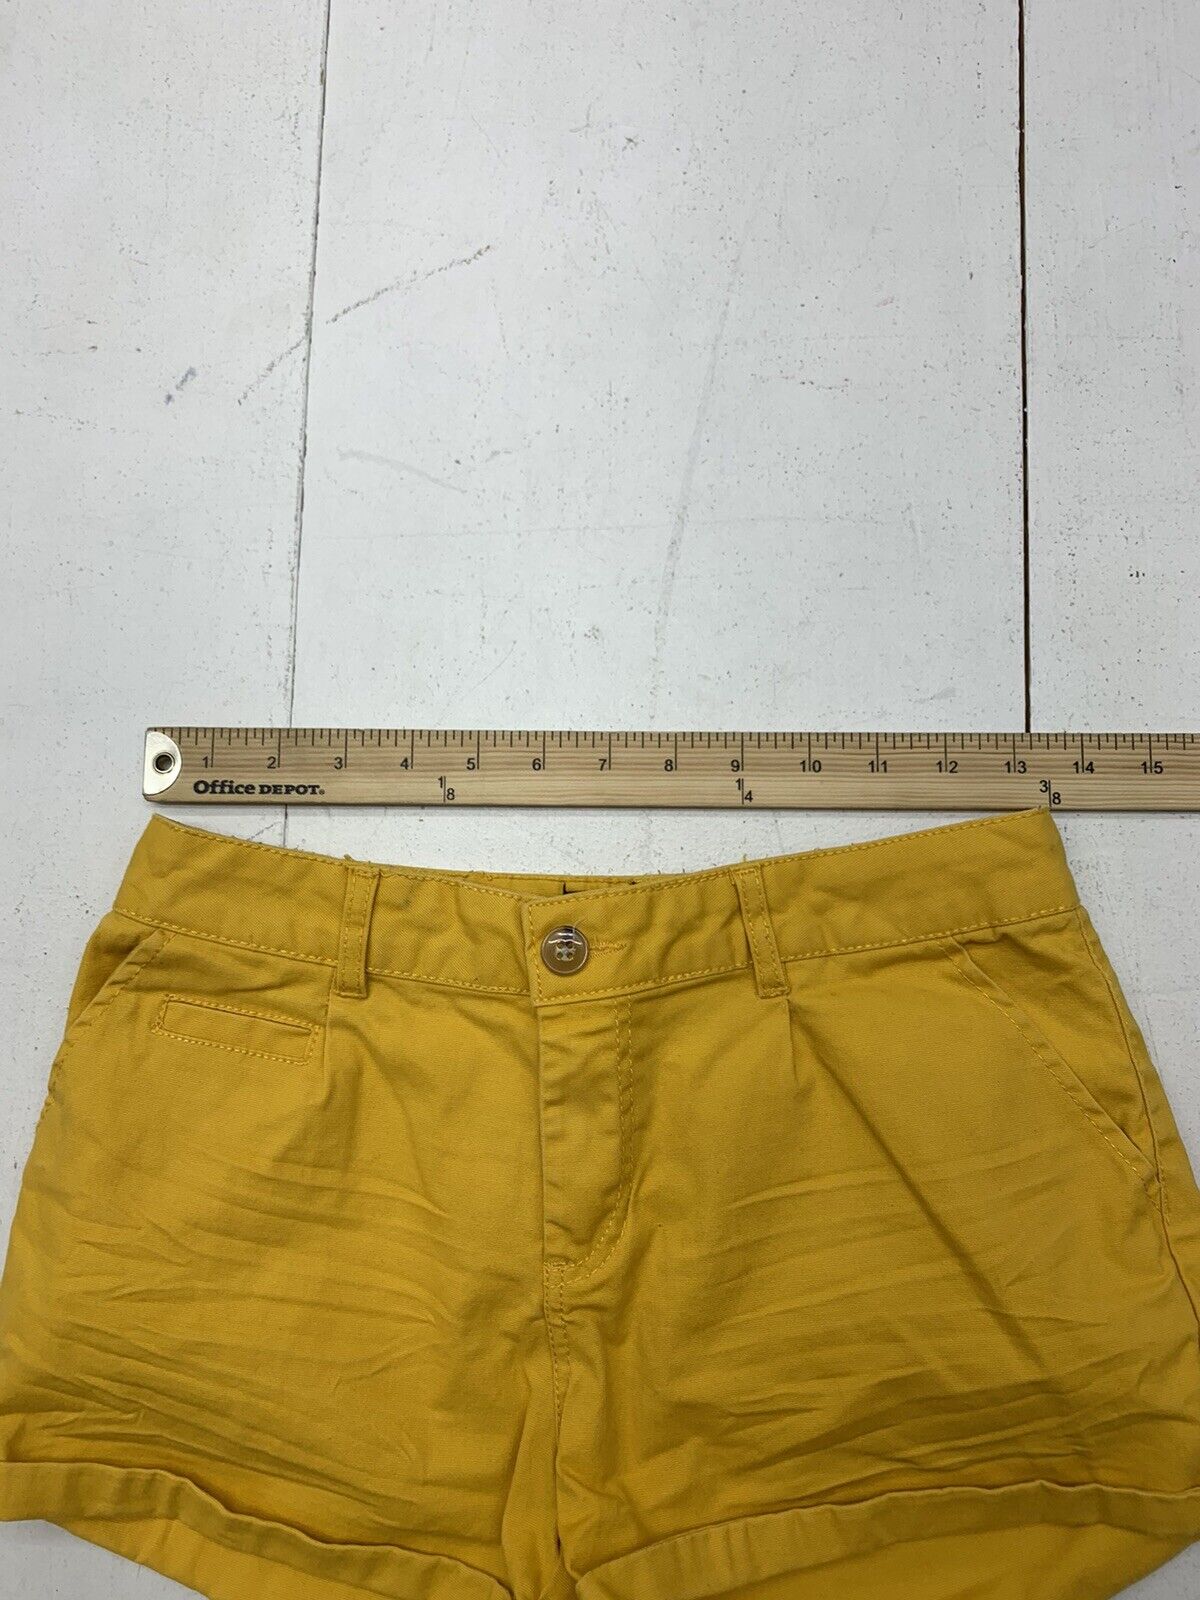 Ambiance Apparel Womens Yellow Shorts Size Small - beyond exchange